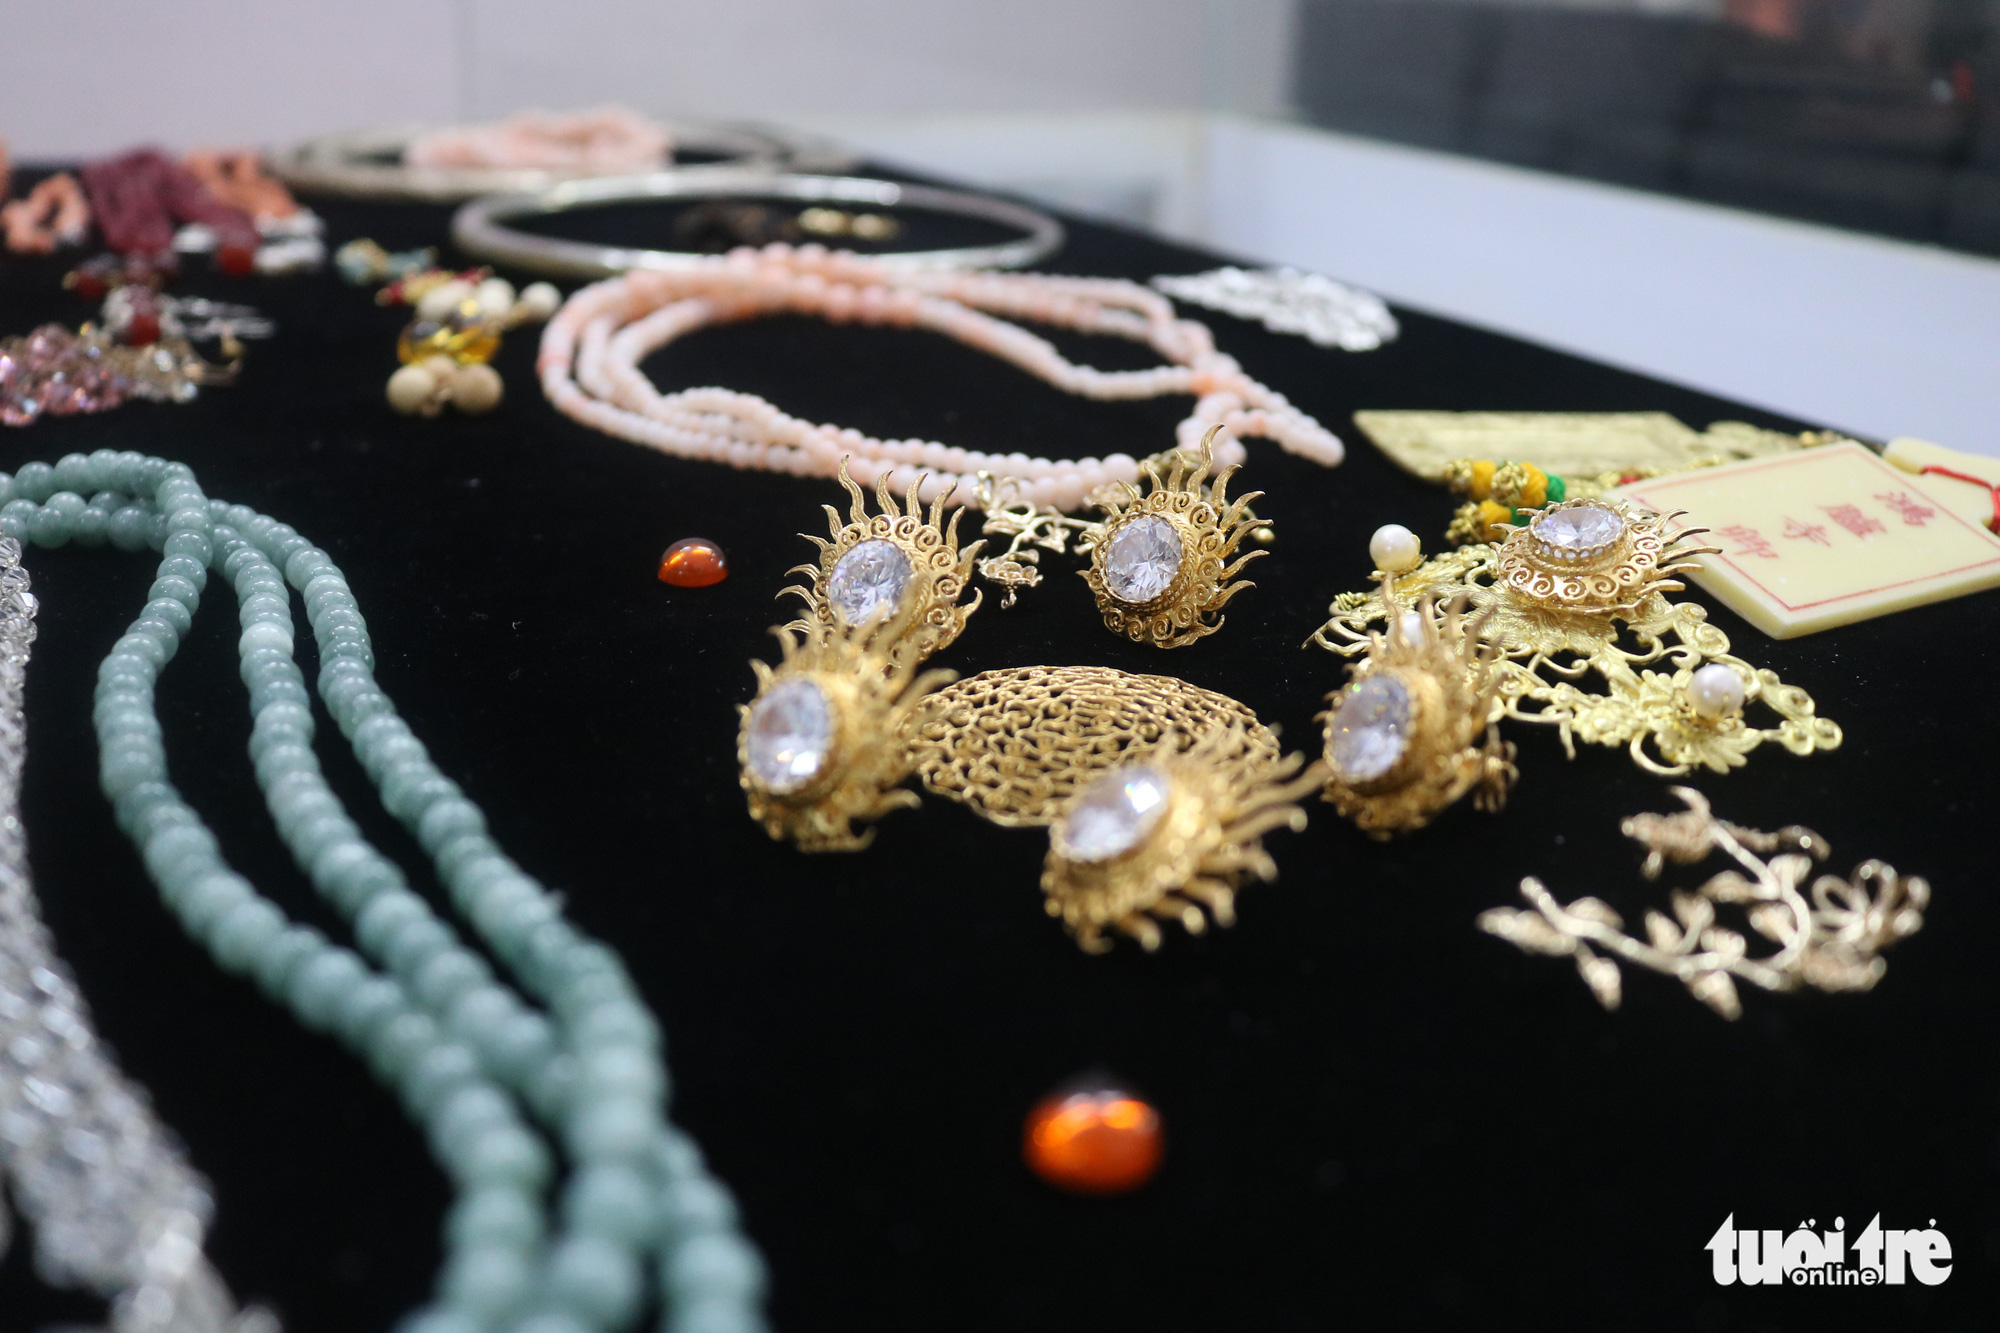 Accessories and jewelry under the Nguyen Dynasty made by Tran Quang Minh Tan